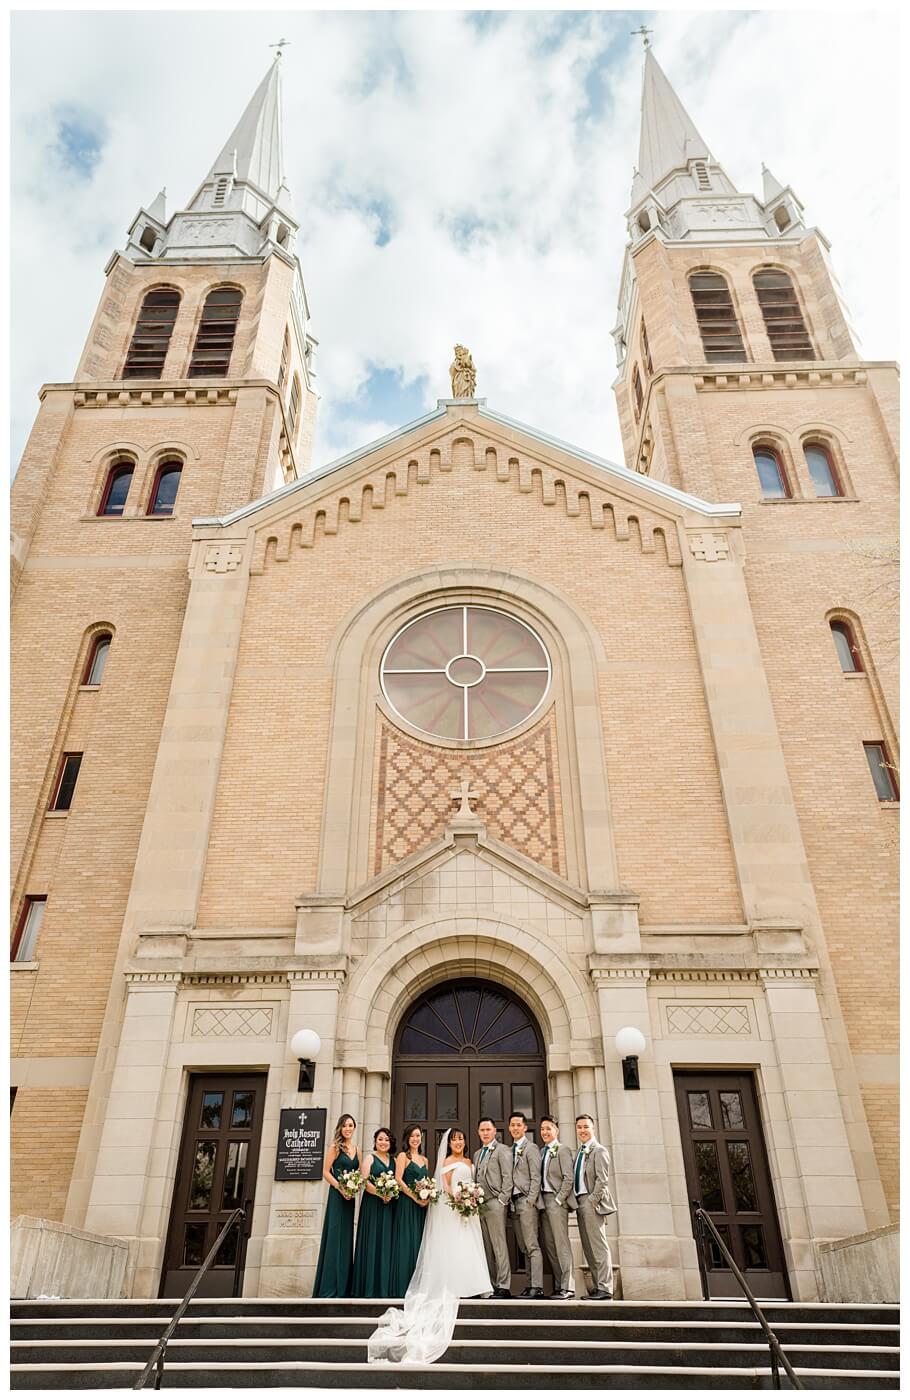 Sam & Benton - Holy Rosary Cathedral - 17 - Bridal Party outside cathedral